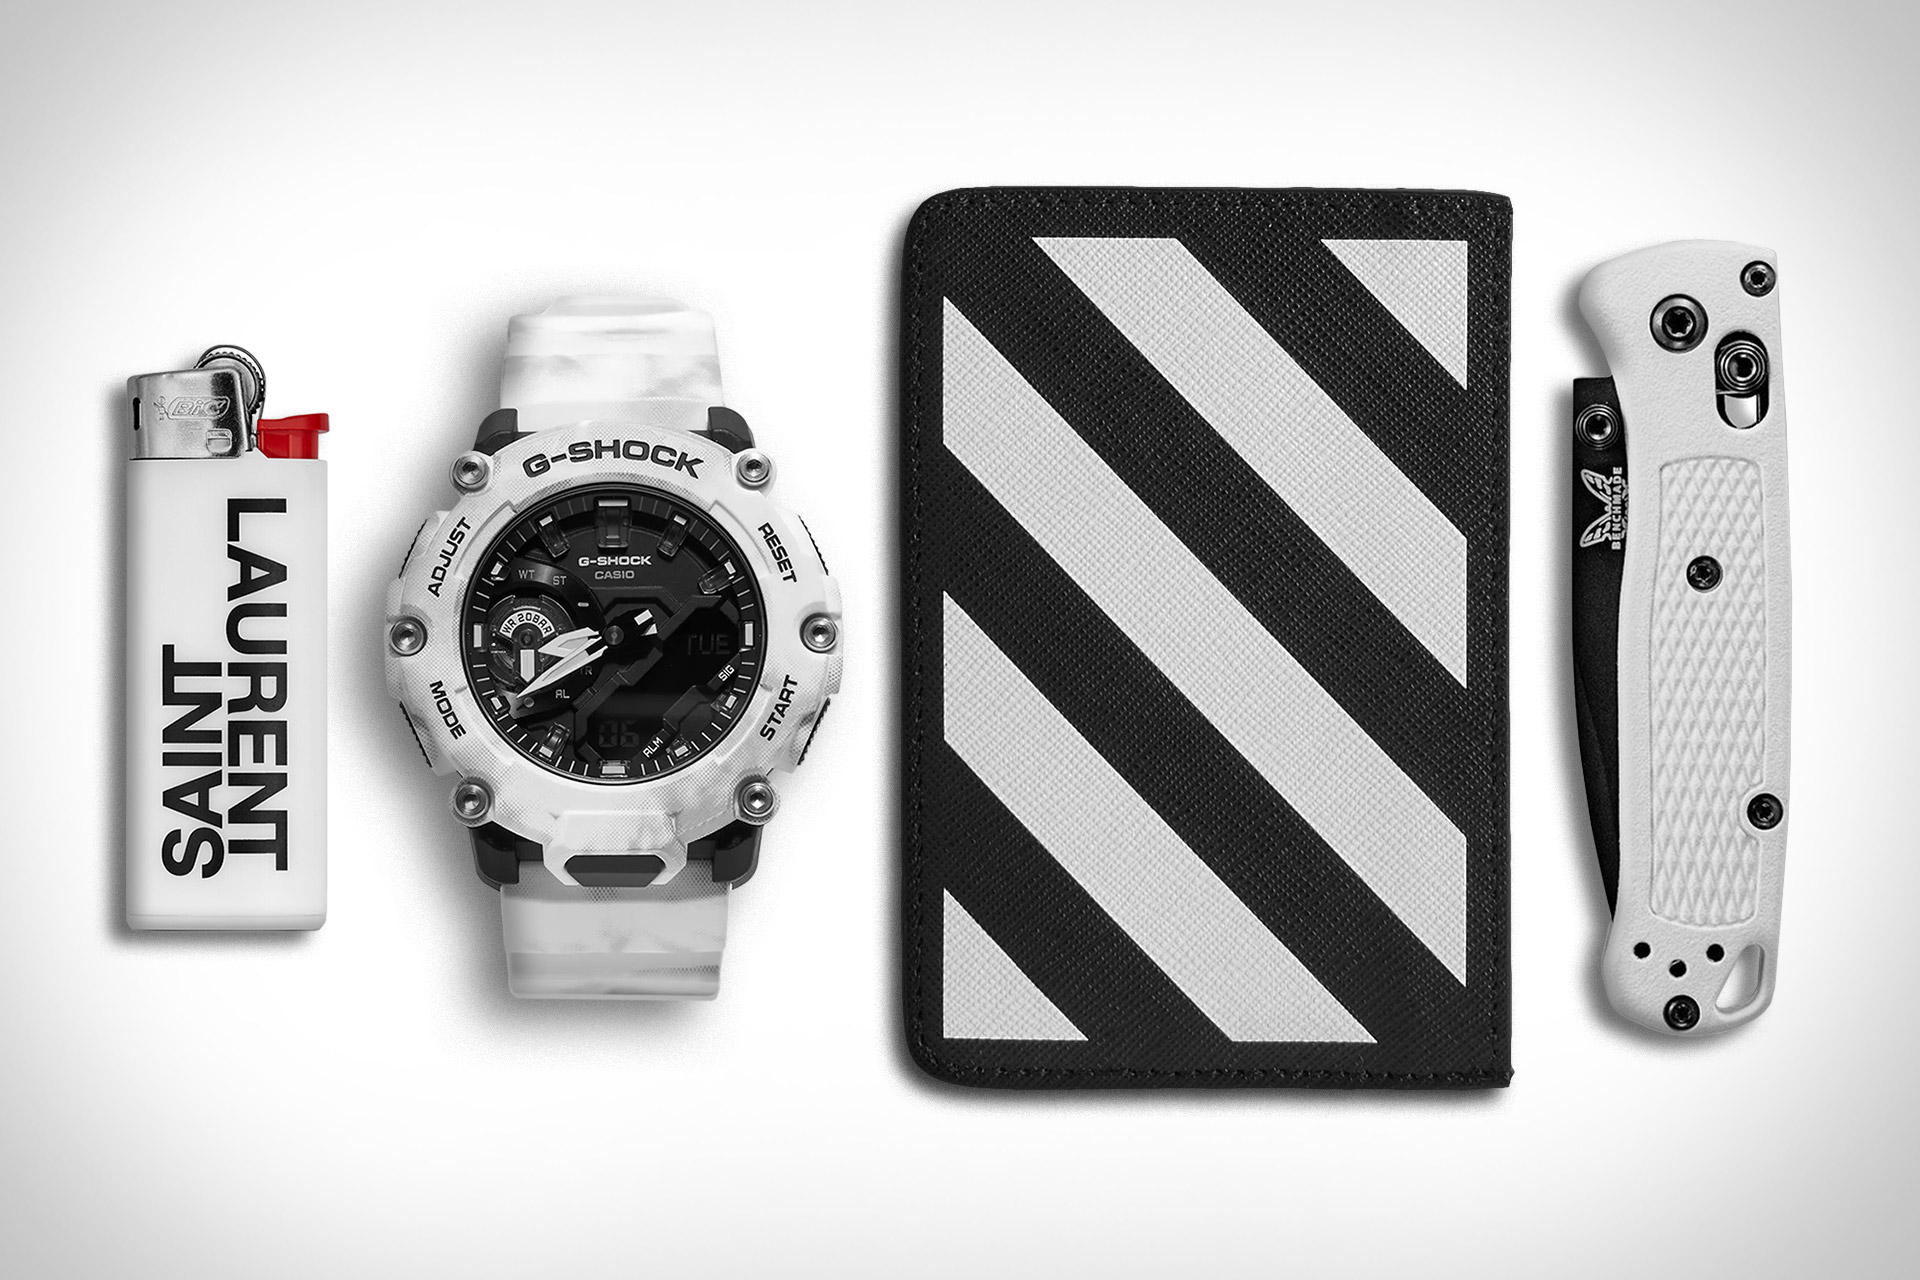 Everyday Carry: Stripes | Uncrate, #Everyday #Carry #Stripes #Uncrate